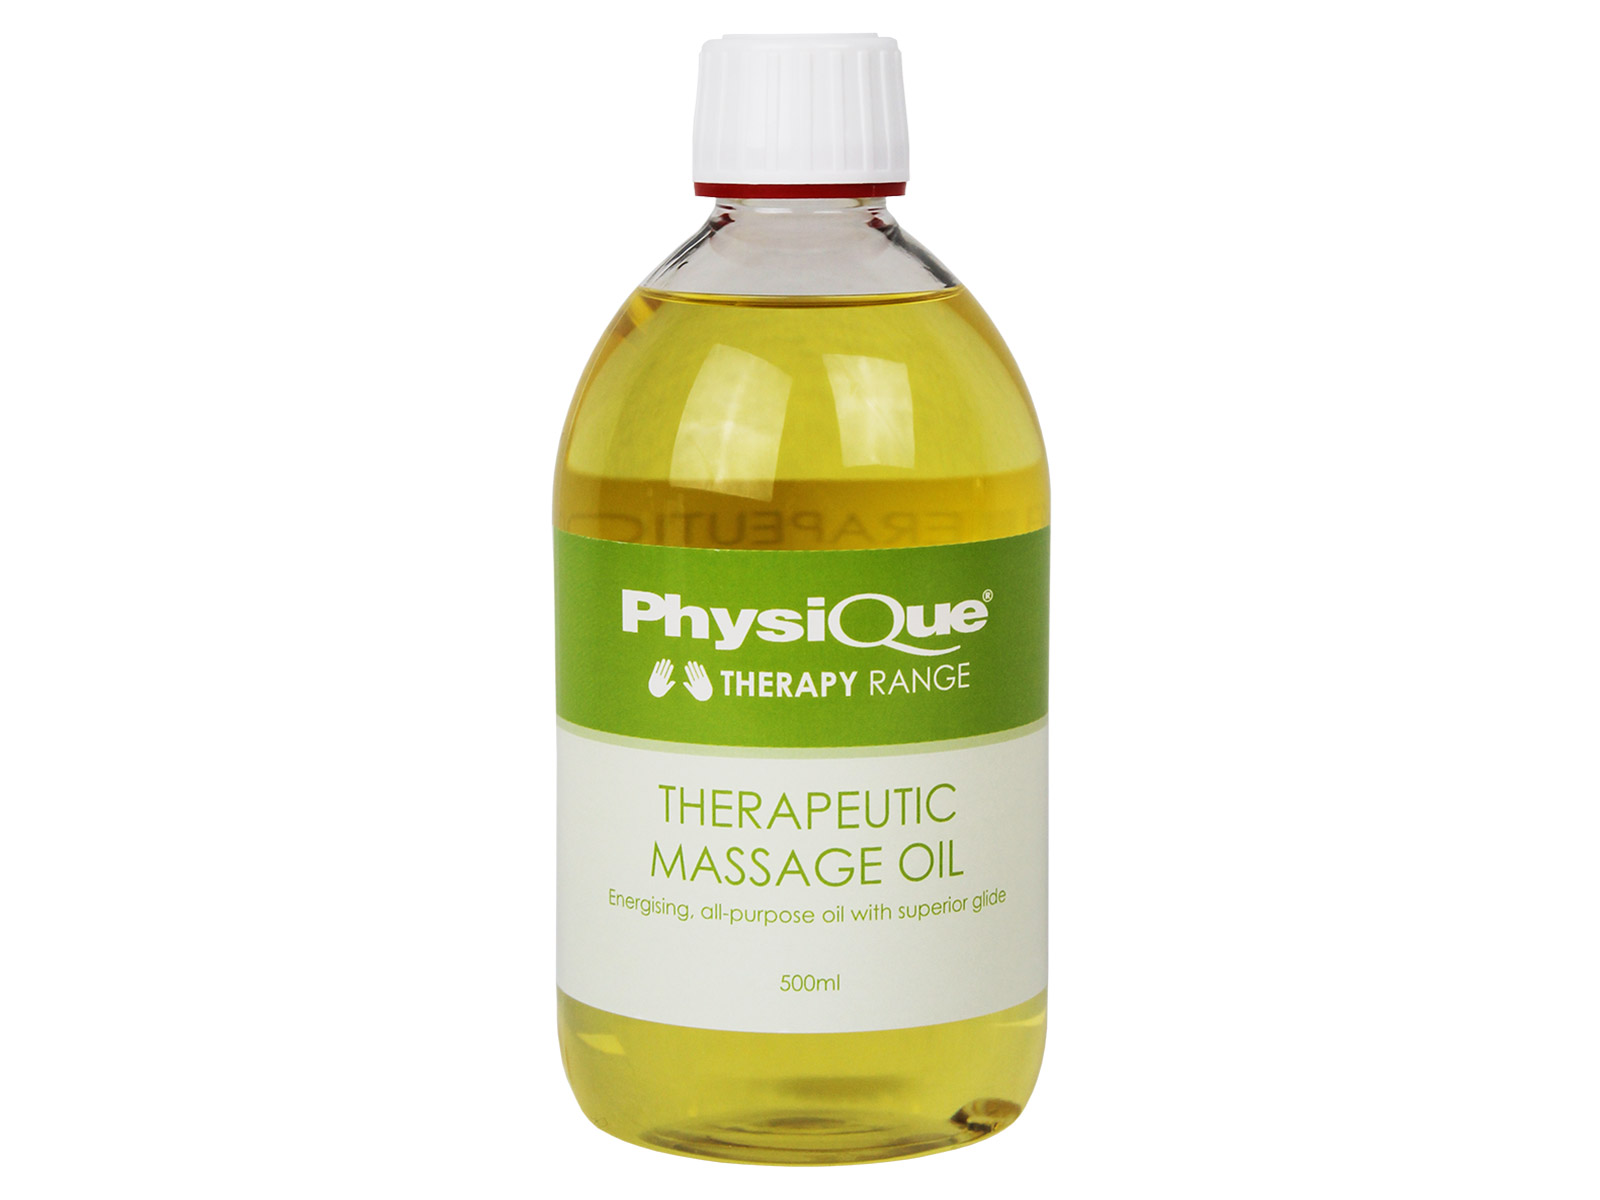 Physique Therapeutical Massage Oil 500ml